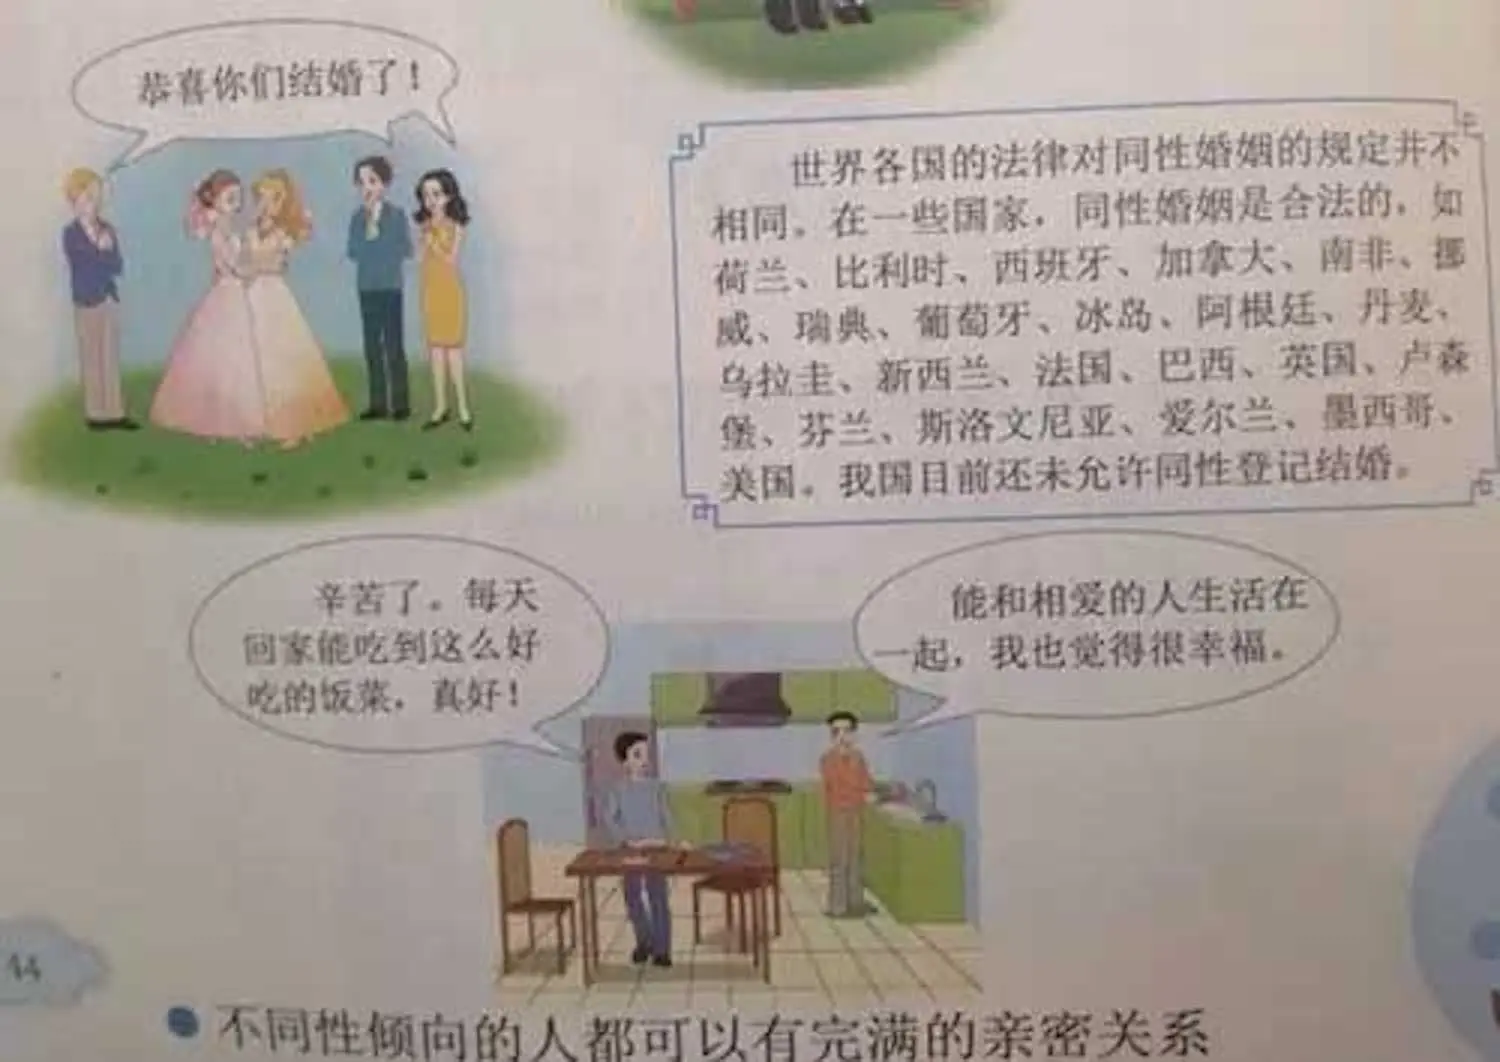 Chinese sex education booklet published in March 2017